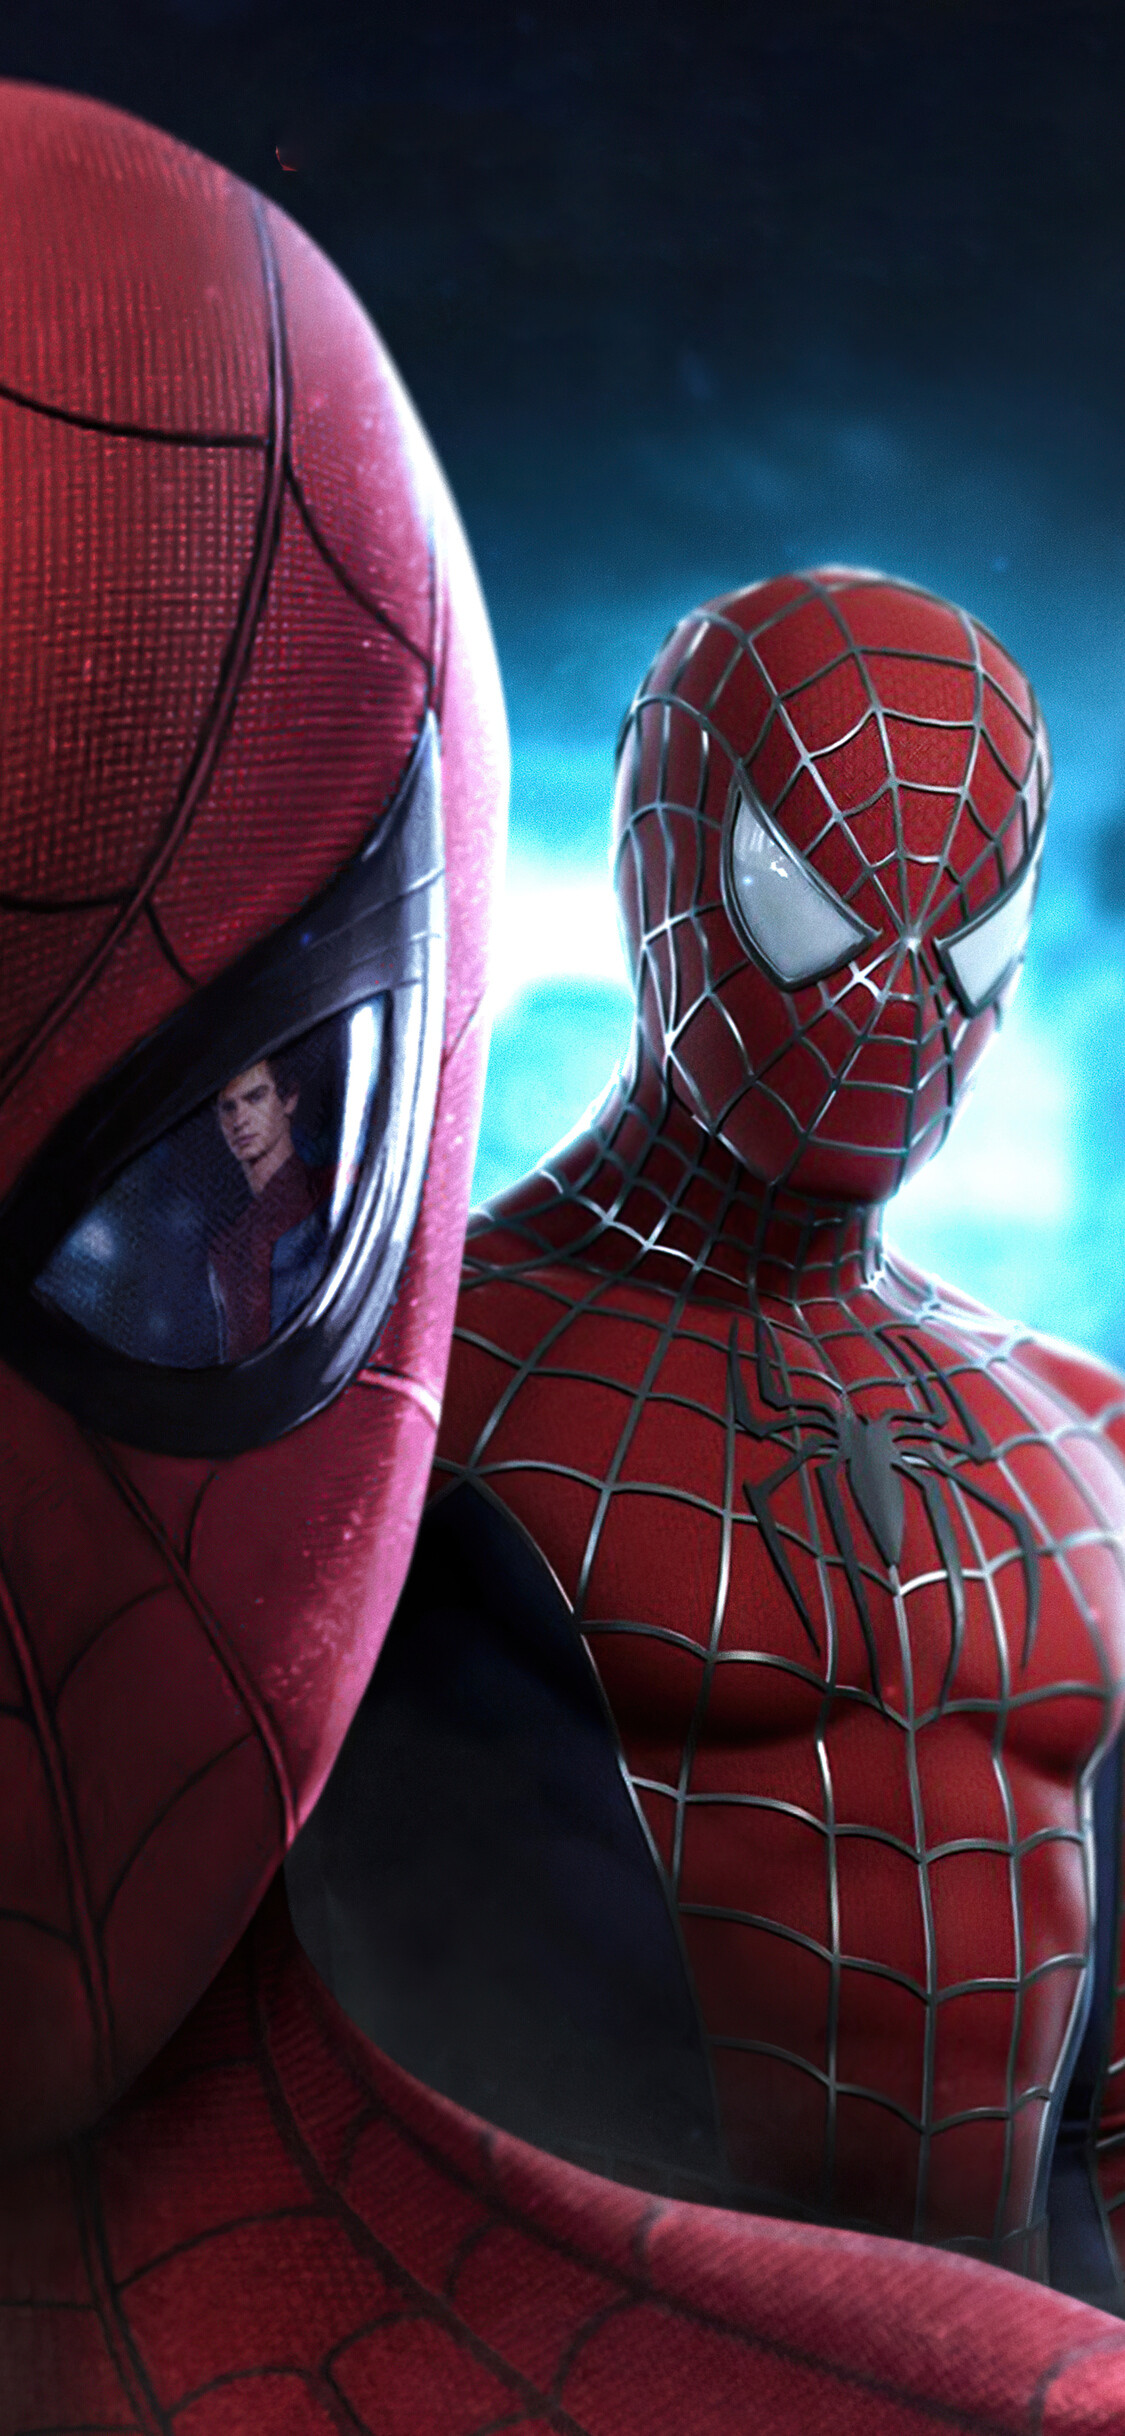 Spider-Man: No Way Home: Tobey Maguire and Andrew Garfield returned as their respective versions of Peter Parker. 1130x2440 HD Wallpaper.